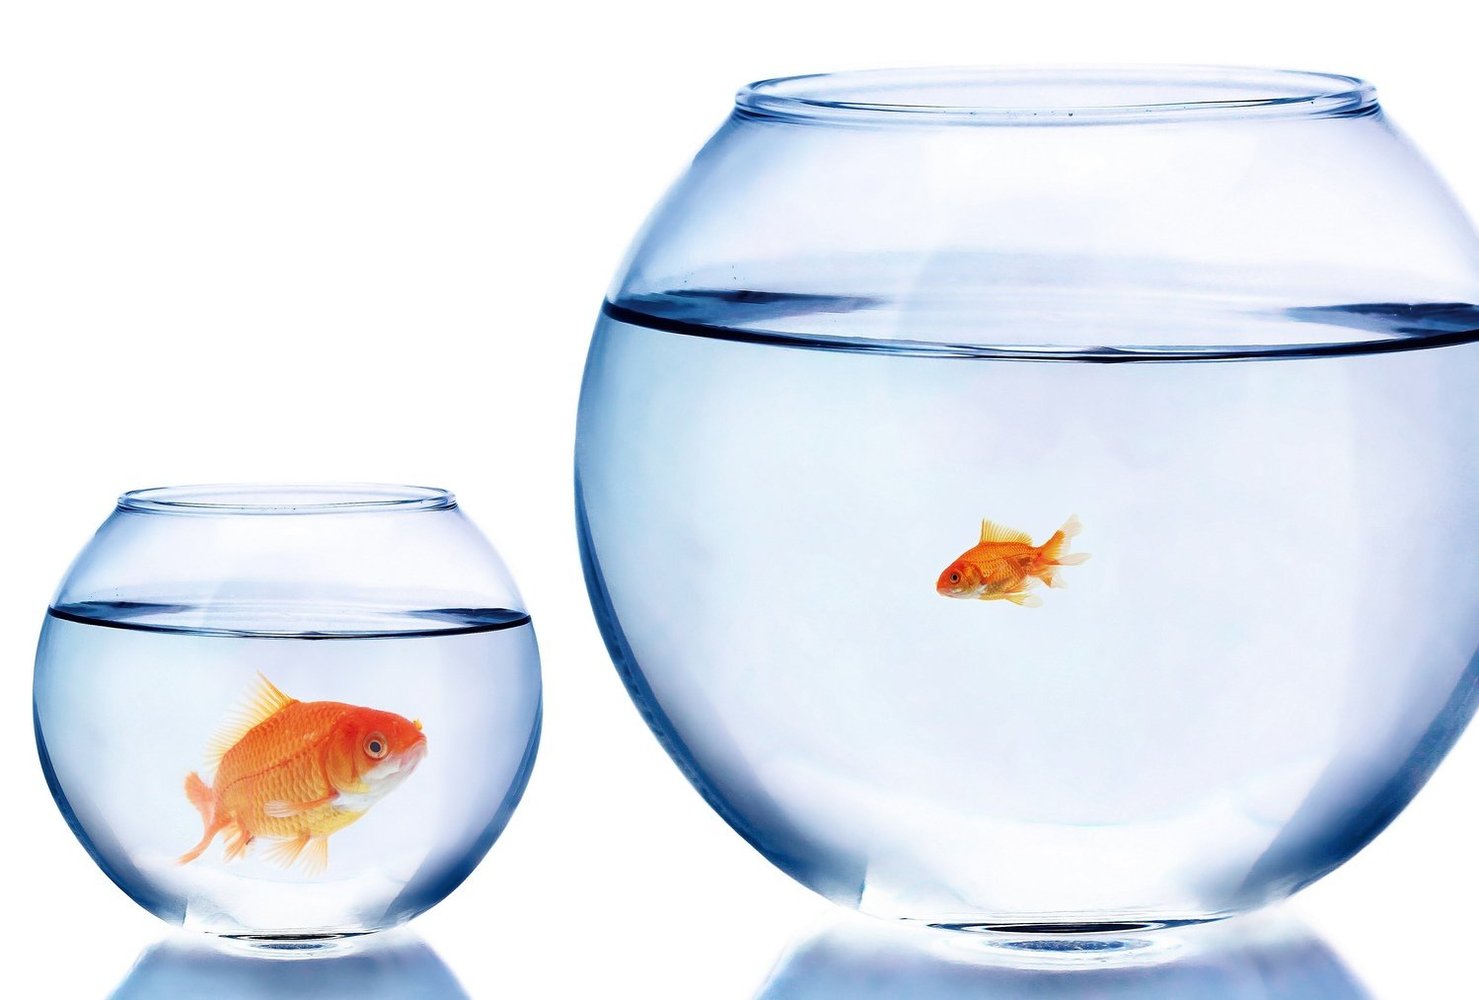 Big goldfish in a small bowl and a small goldfish in a large bowl